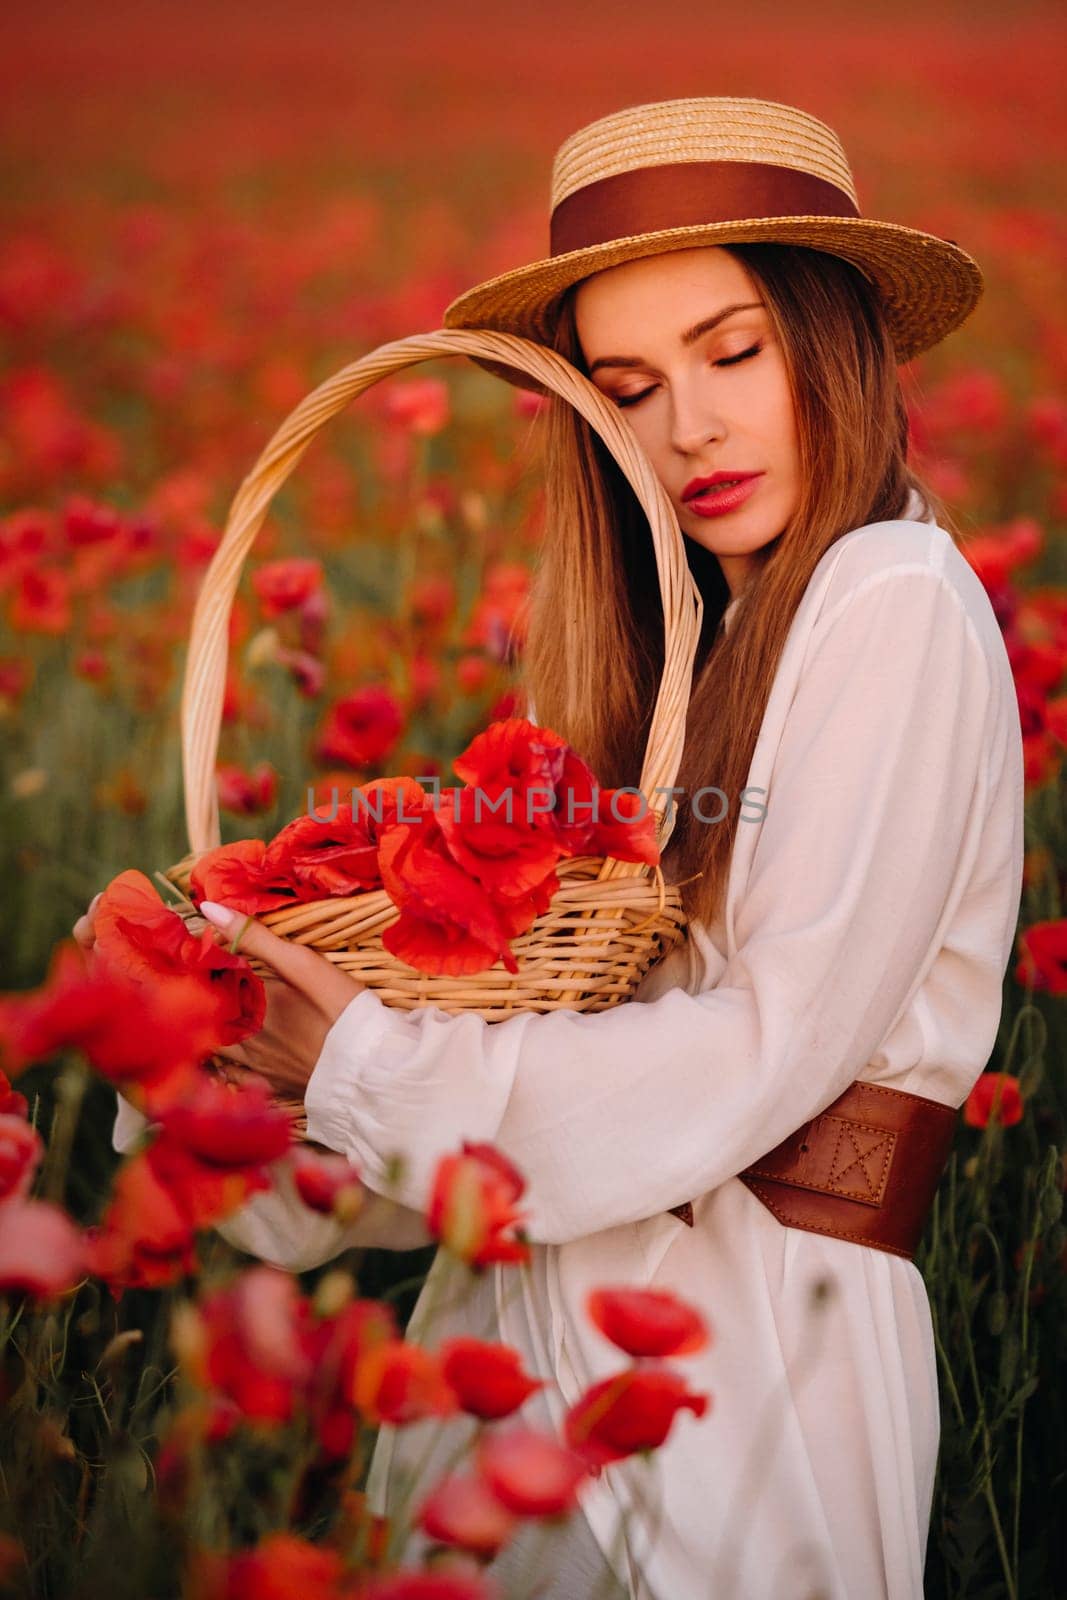 a girl in a white dress, a hat and with a basket in a field with poppies by Lobachad